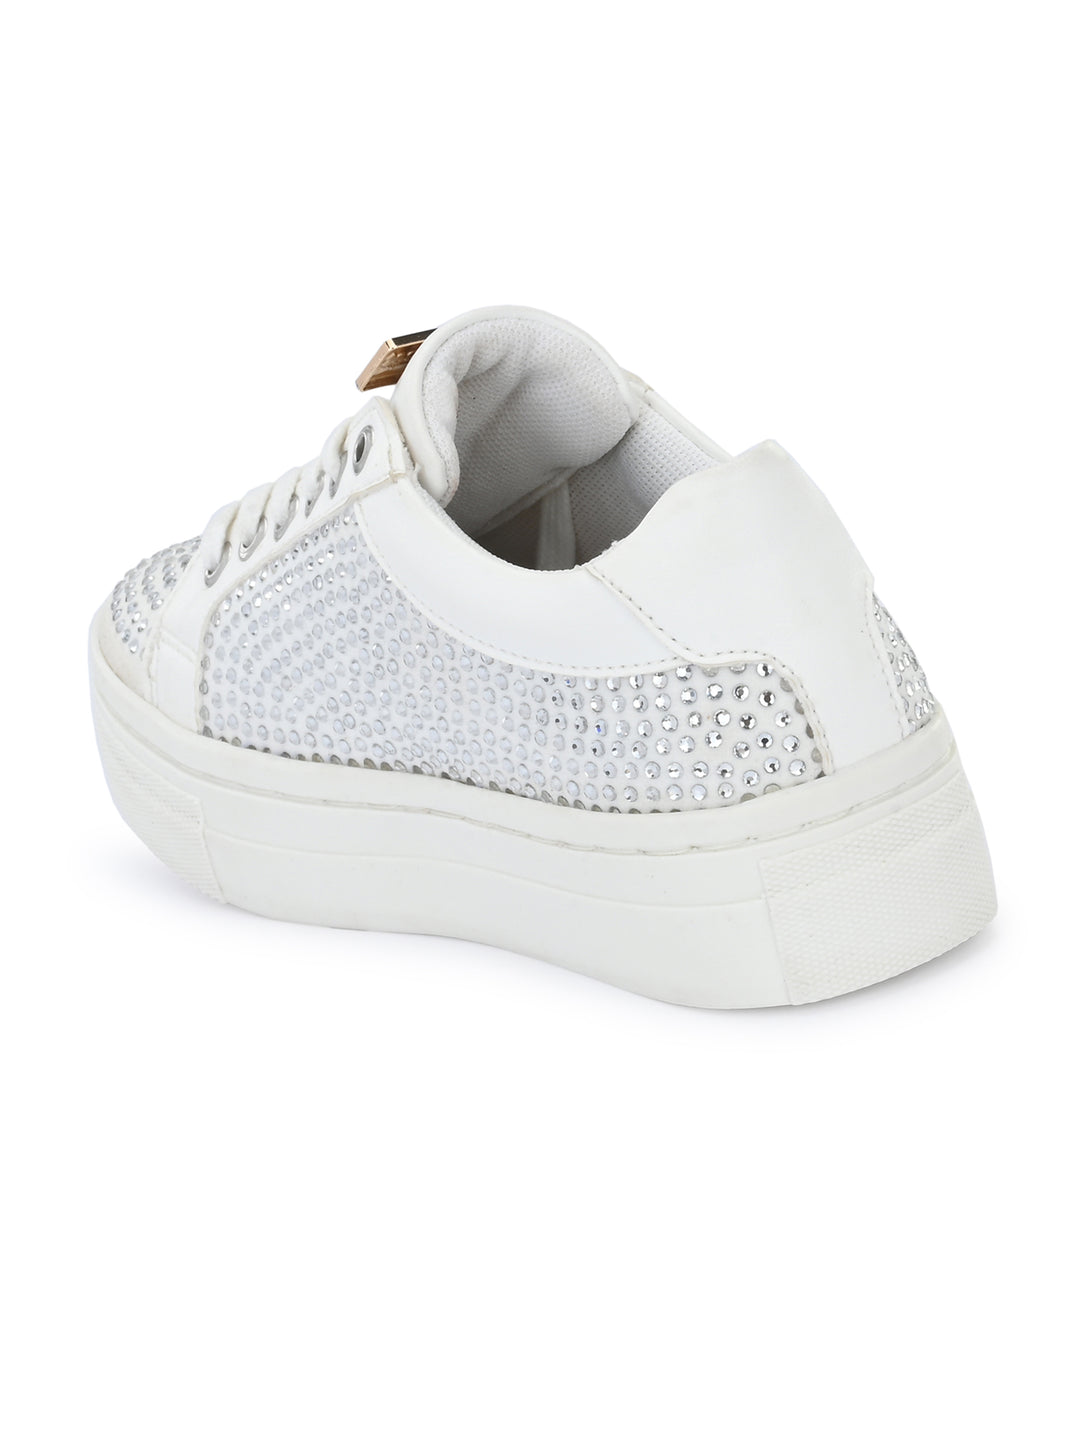 Nora White Dual Size technology Shoes for Kids